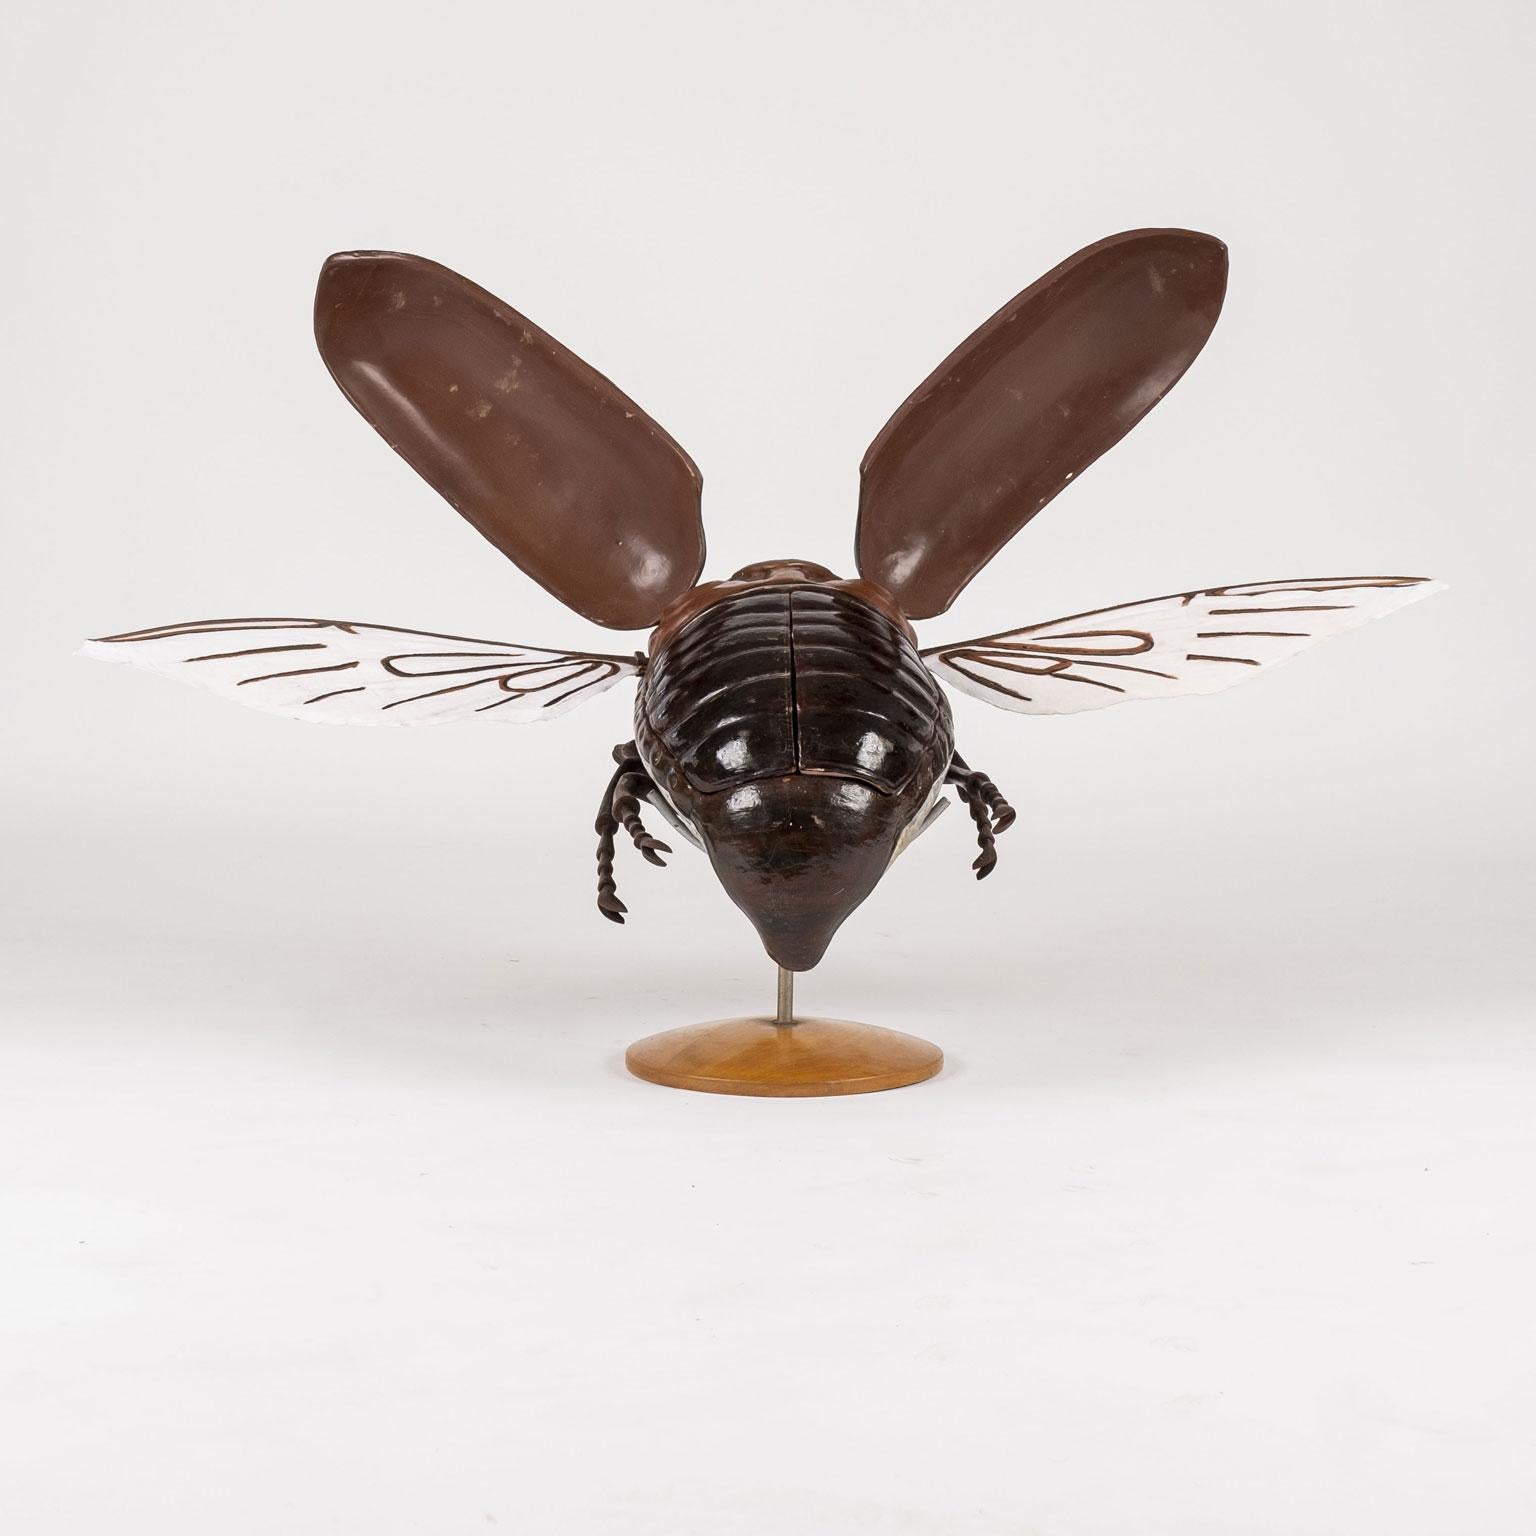 Other Large Sculpture of Beetle in Flight